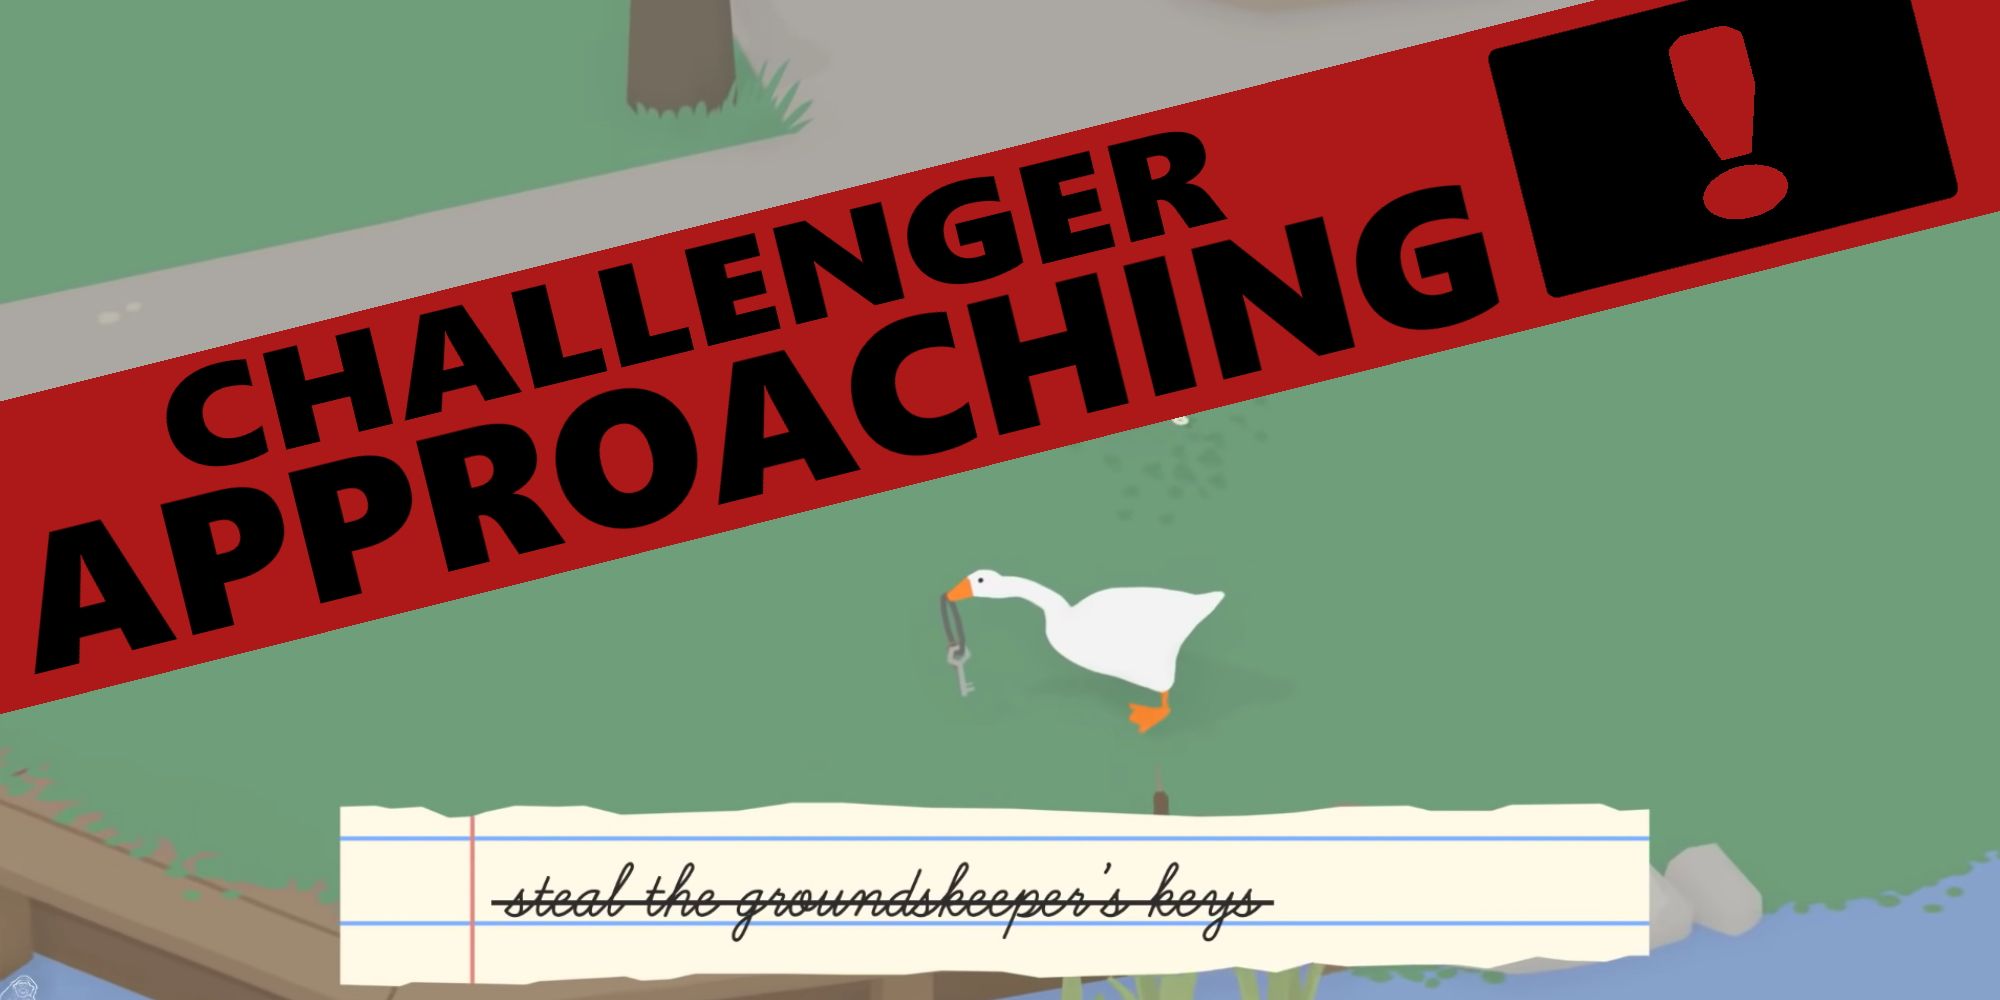 Goose from Untitled Goose Game with the "challenger approaching" text scrawl (from Smash Bros)